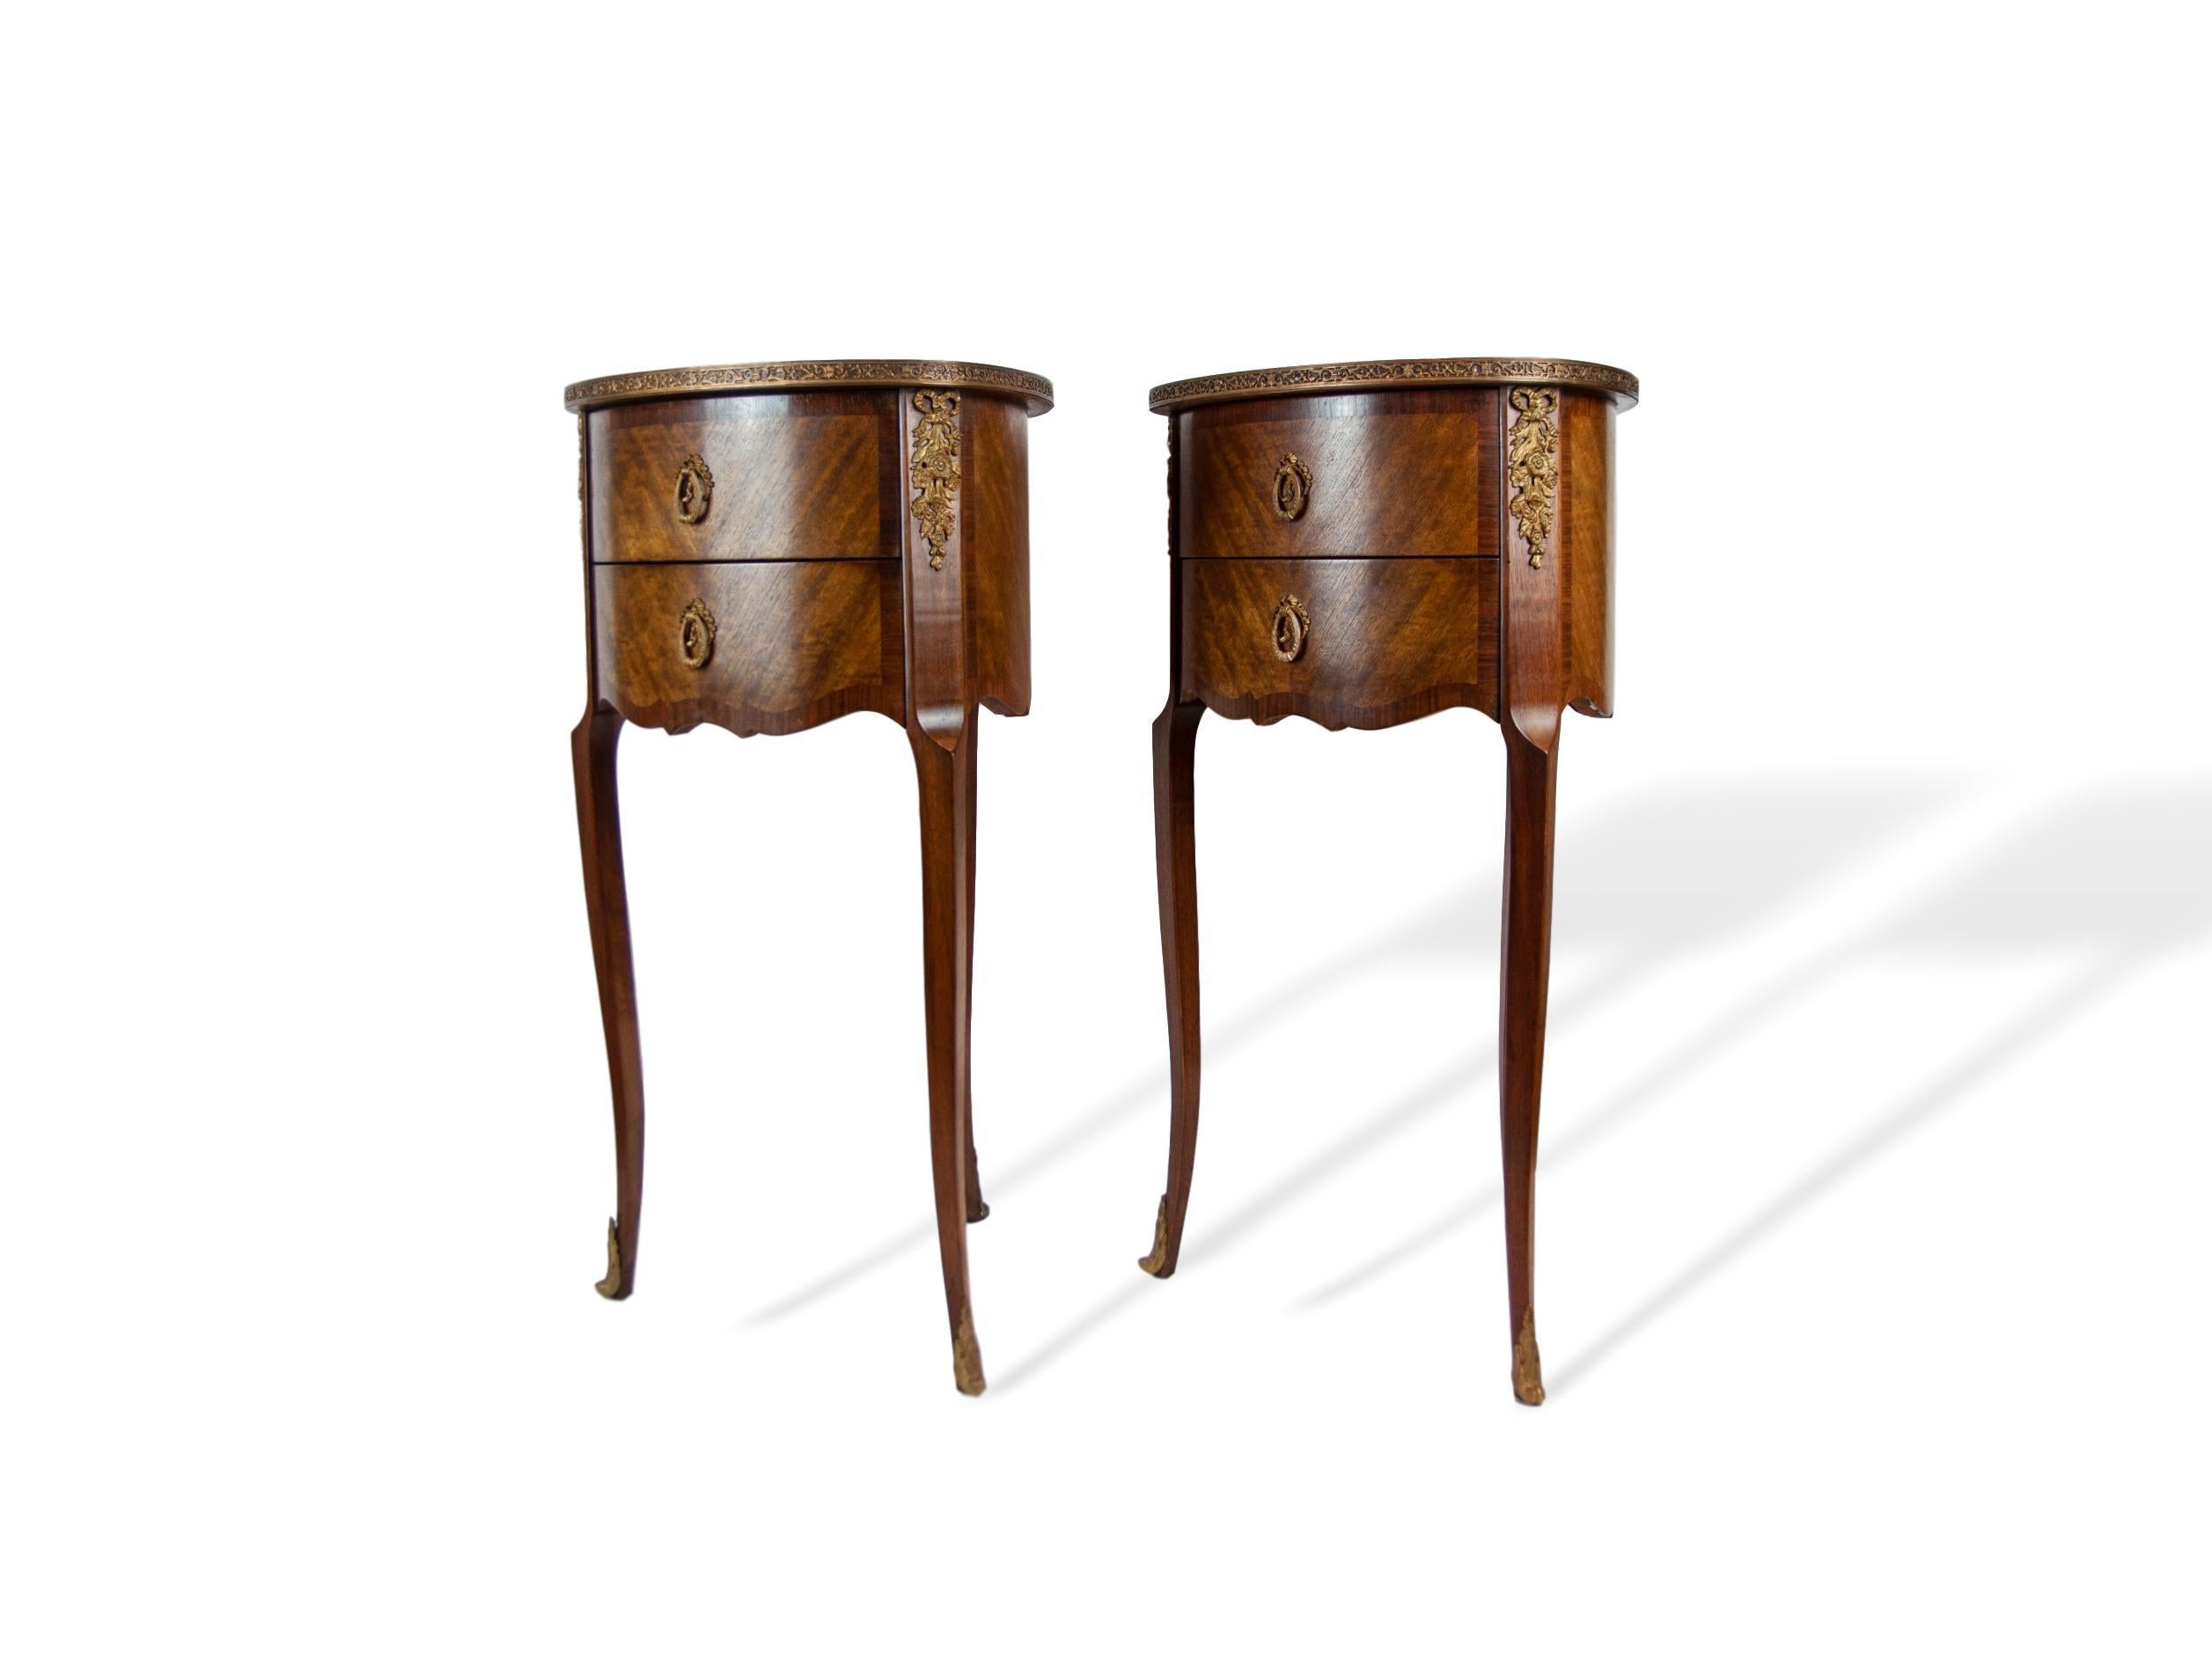 Pair of walnut rosewood banded two-drawer side tables, French, circa 1920, with gilded bronze mounts, sabots, and pierced edging. An unusual and graceful form, tear-drop shaped with three legs and three-sided, sold oak, dovetailed drawers.